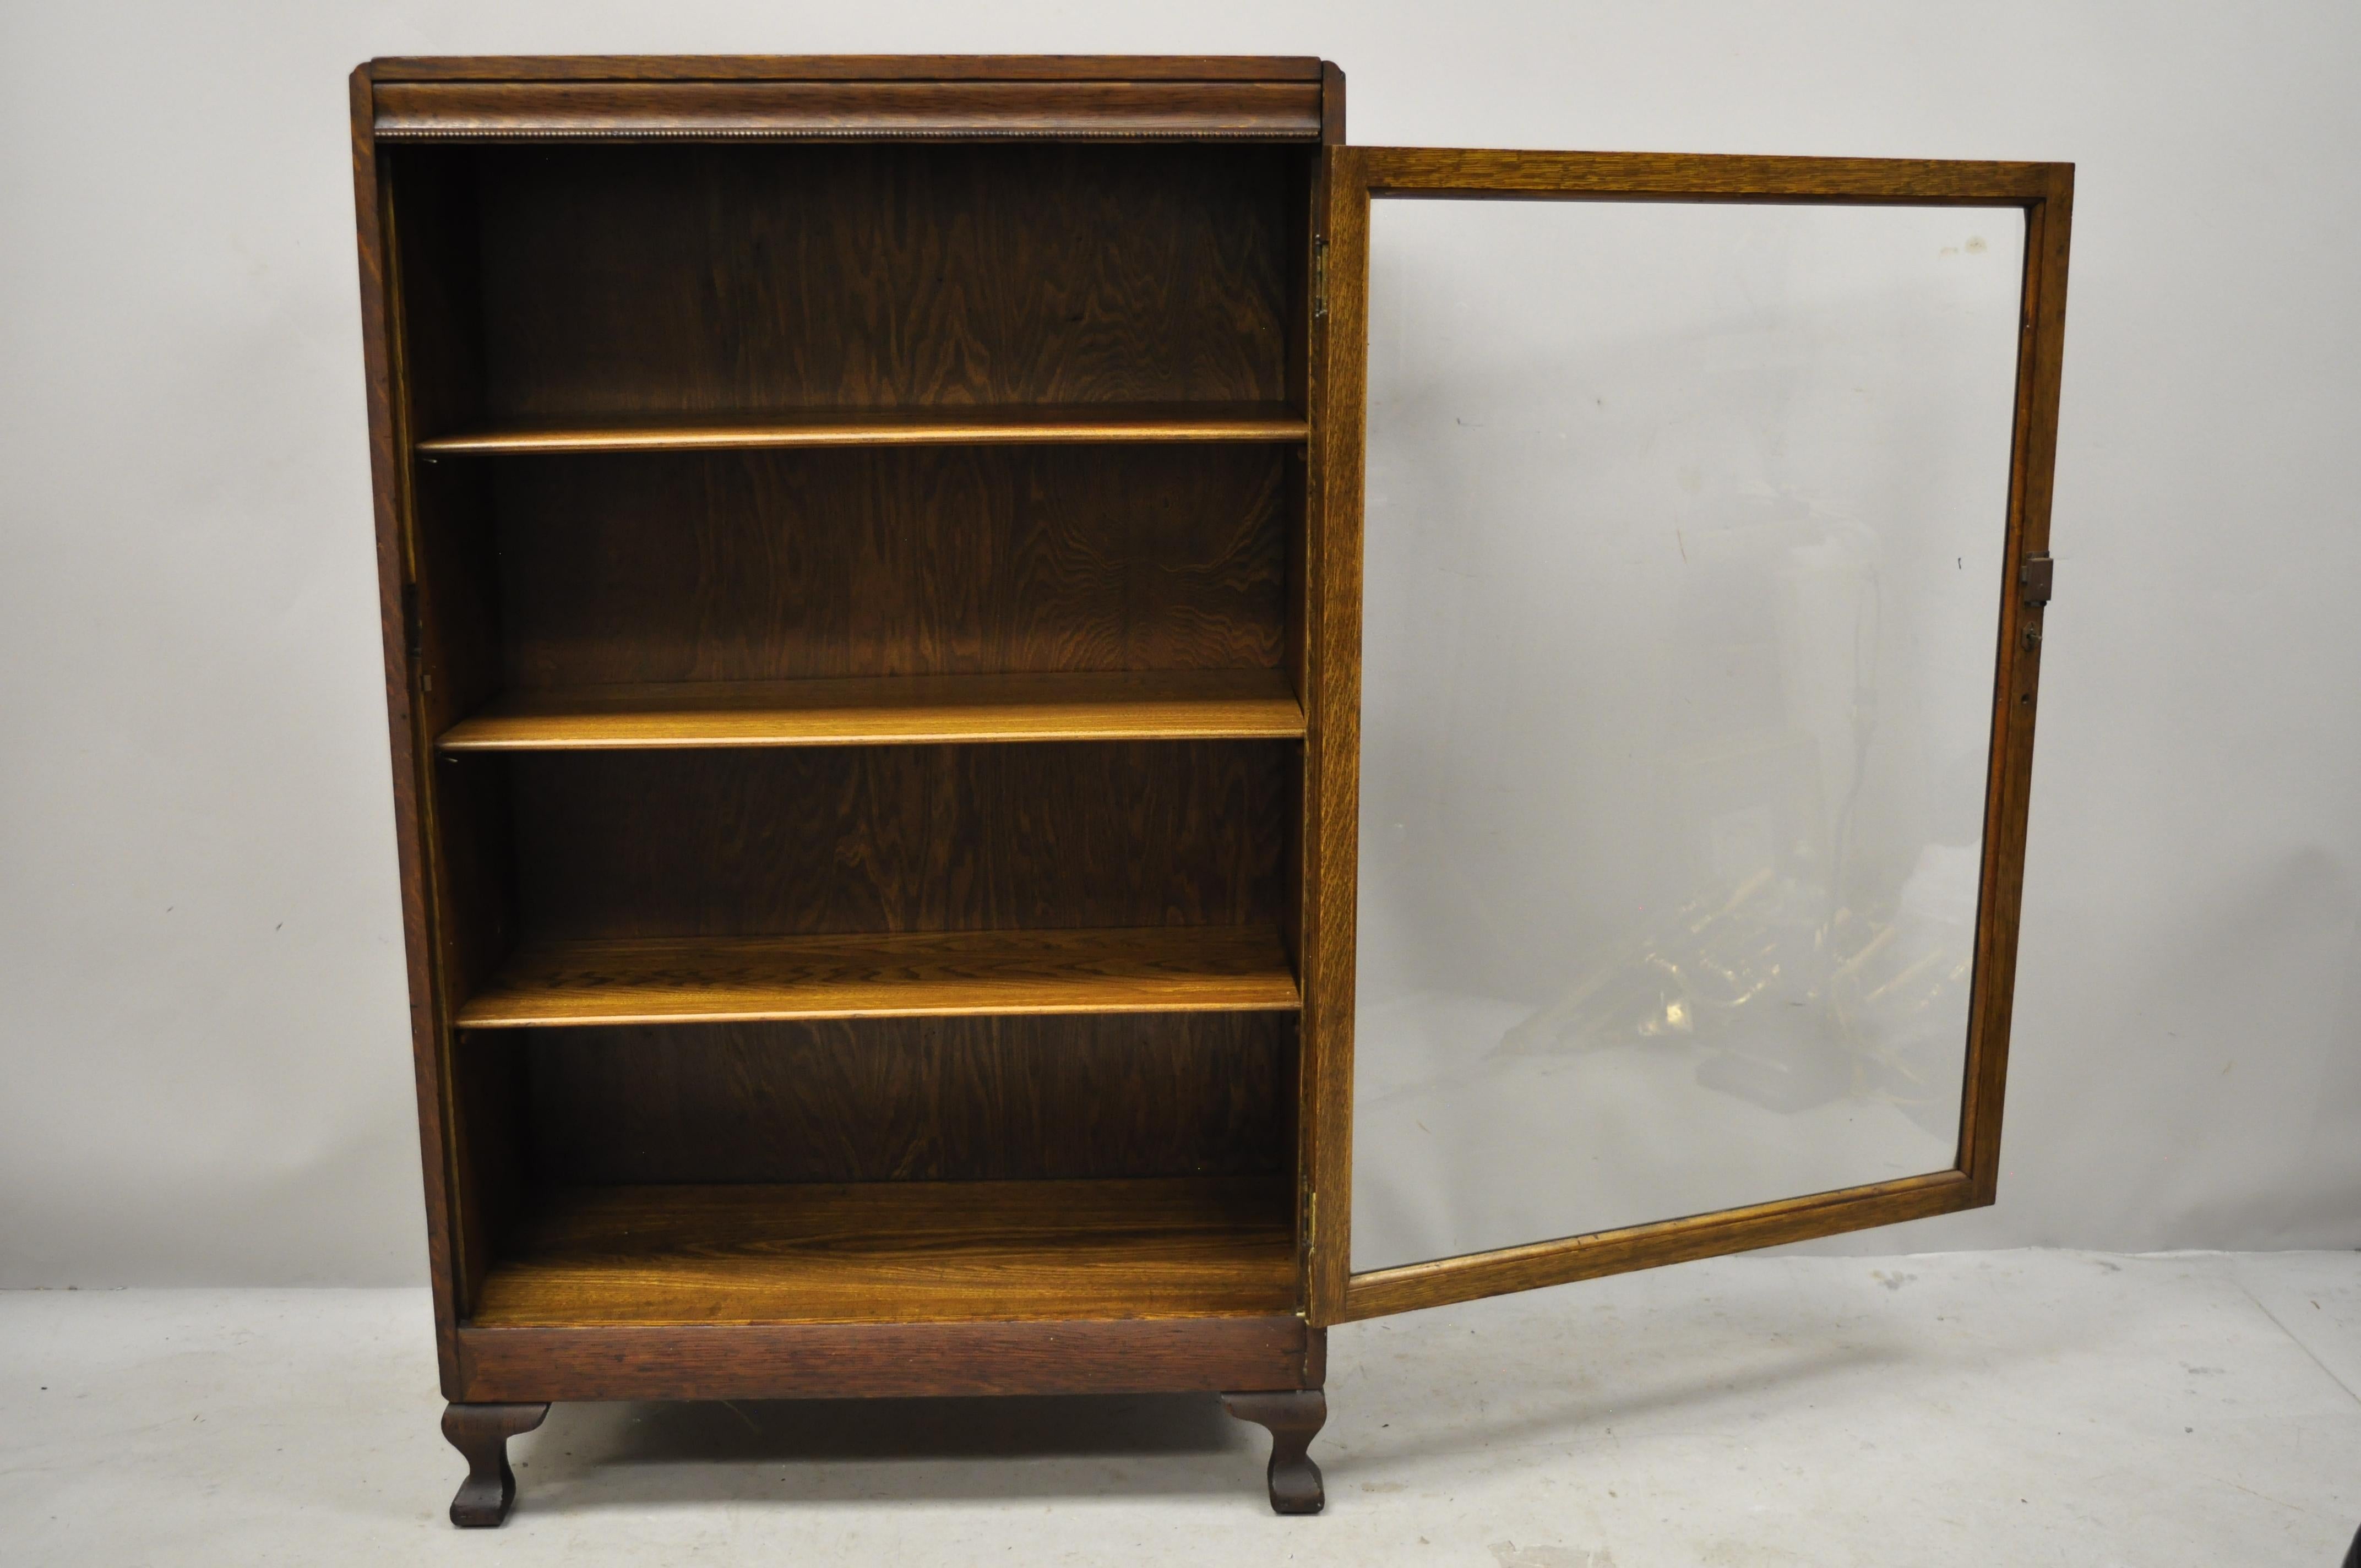 North American Mission Arts & Crafts Oakwood Single Glass Door Small Bookcase Display Cabinet